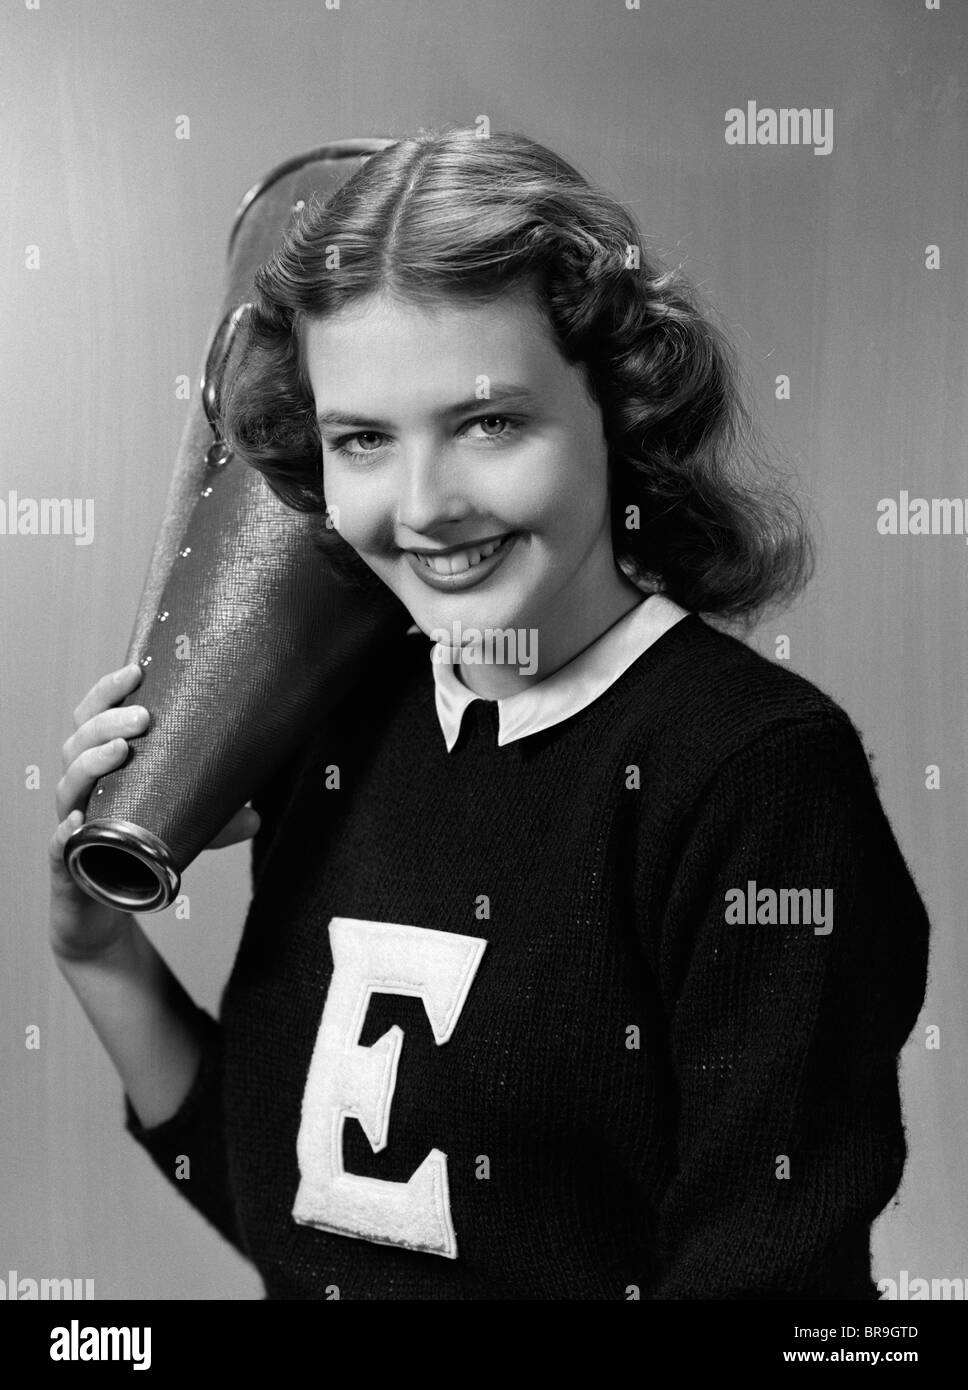 1940s 1950s GIRL CHEERLEADER WITH MEGAPHONE SMILING LOOKING AT CAMERA Stock Photo